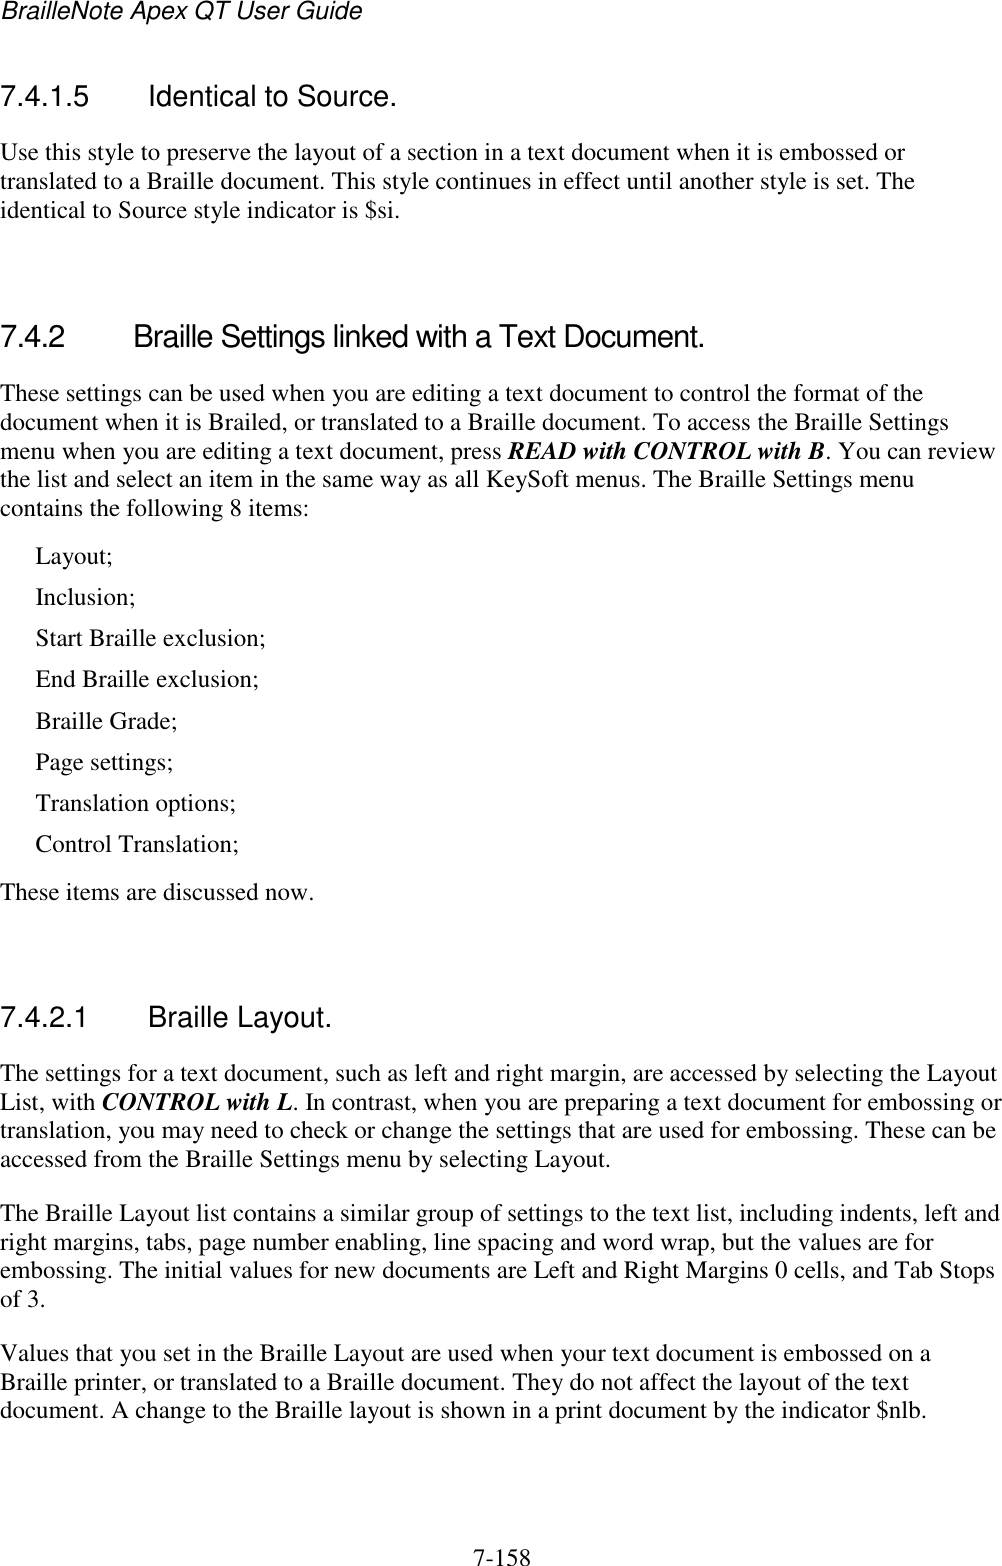 BrailleNote Apex QT User Guide  7-158   7.4.1.5  Identical to Source. Use this style to preserve the layout of a section in a text document when it is embossed or translated to a Braille document. This style continues in effect until another style is set. The identical to Source style indicator is $si.   7.4.2  Braille Settings linked with a Text Document. These settings can be used when you are editing a text document to control the format of the document when it is Brailed, or translated to a Braille document. To access the Braille Settings menu when you are editing a text document, press READ with CONTROL with B. You can review the list and select an item in the same way as all KeySoft menus. The Braille Settings menu contains the following 8 items: Layout; Inclusion; Start Braille exclusion; End Braille exclusion; Braille Grade; Page settings; Translation options; Control Translation; These items are discussed now.   7.4.2.1  Braille Layout. The settings for a text document, such as left and right margin, are accessed by selecting the Layout List, with CONTROL with L. In contrast, when you are preparing a text document for embossing or translation, you may need to check or change the settings that are used for embossing. These can be accessed from the Braille Settings menu by selecting Layout. The Braille Layout list contains a similar group of settings to the text list, including indents, left and right margins, tabs, page number enabling, line spacing and word wrap, but the values are for embossing. The initial values for new documents are Left and Right Margins 0 cells, and Tab Stops of 3. Values that you set in the Braille Layout are used when your text document is embossed on a Braille printer, or translated to a Braille document. They do not affect the layout of the text document. A change to the Braille layout is shown in a print document by the indicator $nlb.   